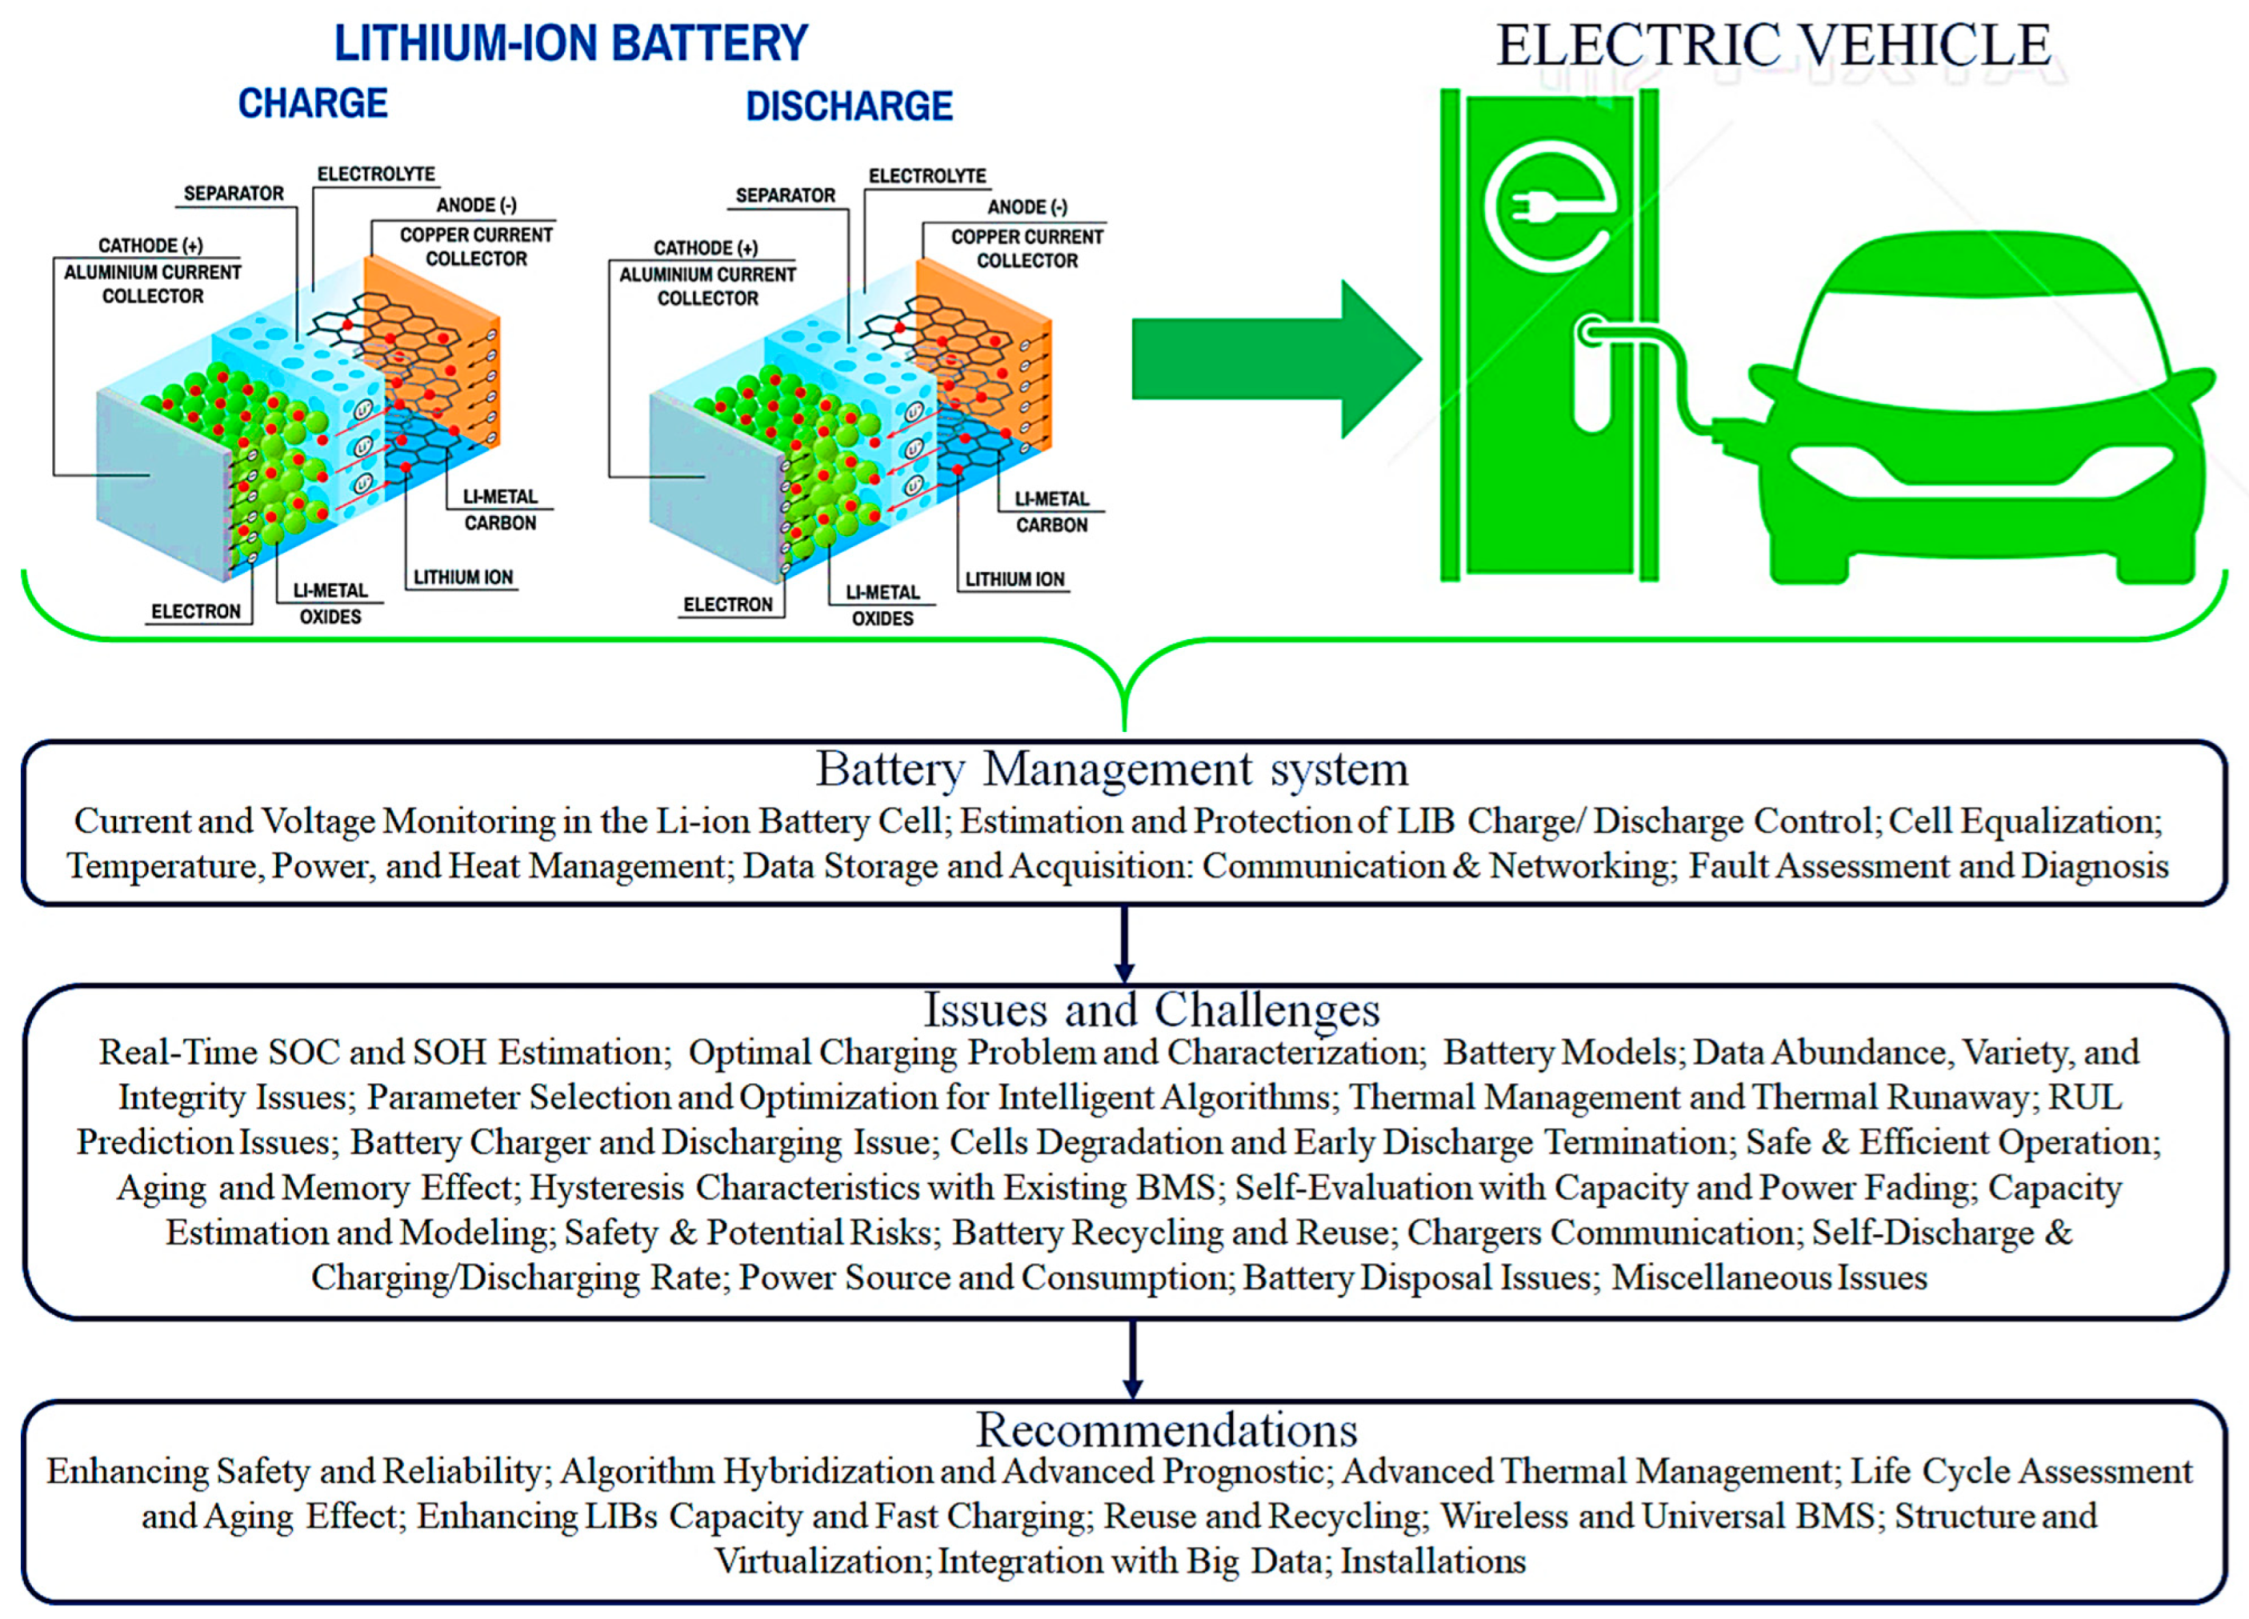 Li-ion Batteries and Battery Management Systems for Electric